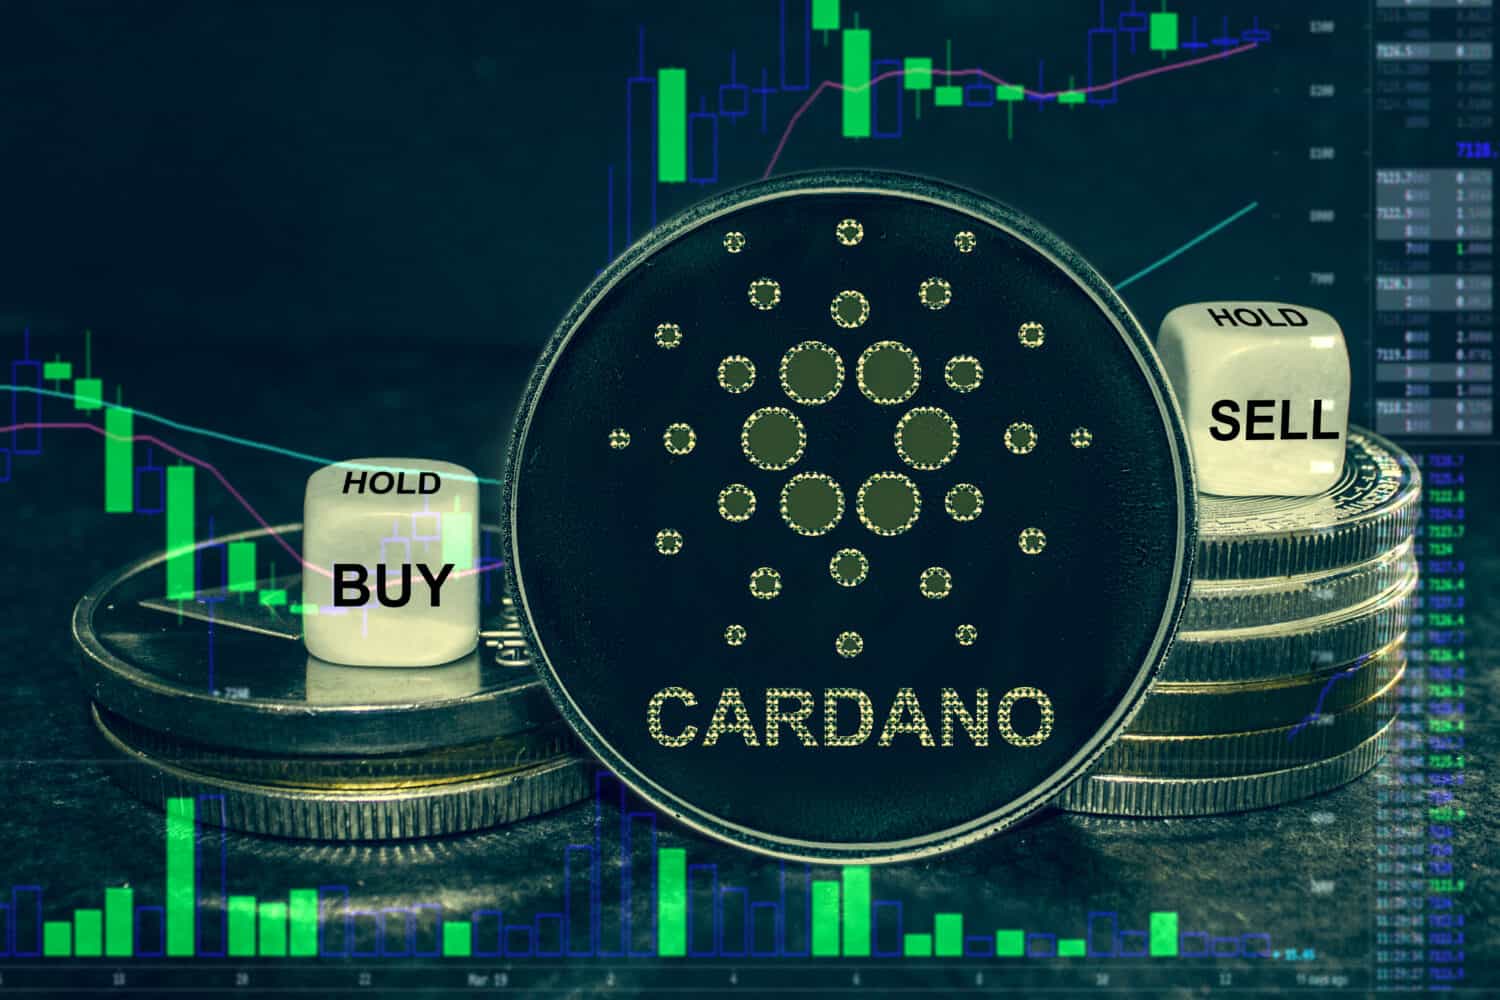 The coin cryptocurrency cardano ada stack of coins and dice. Exchange chart to buy, sell, hold.